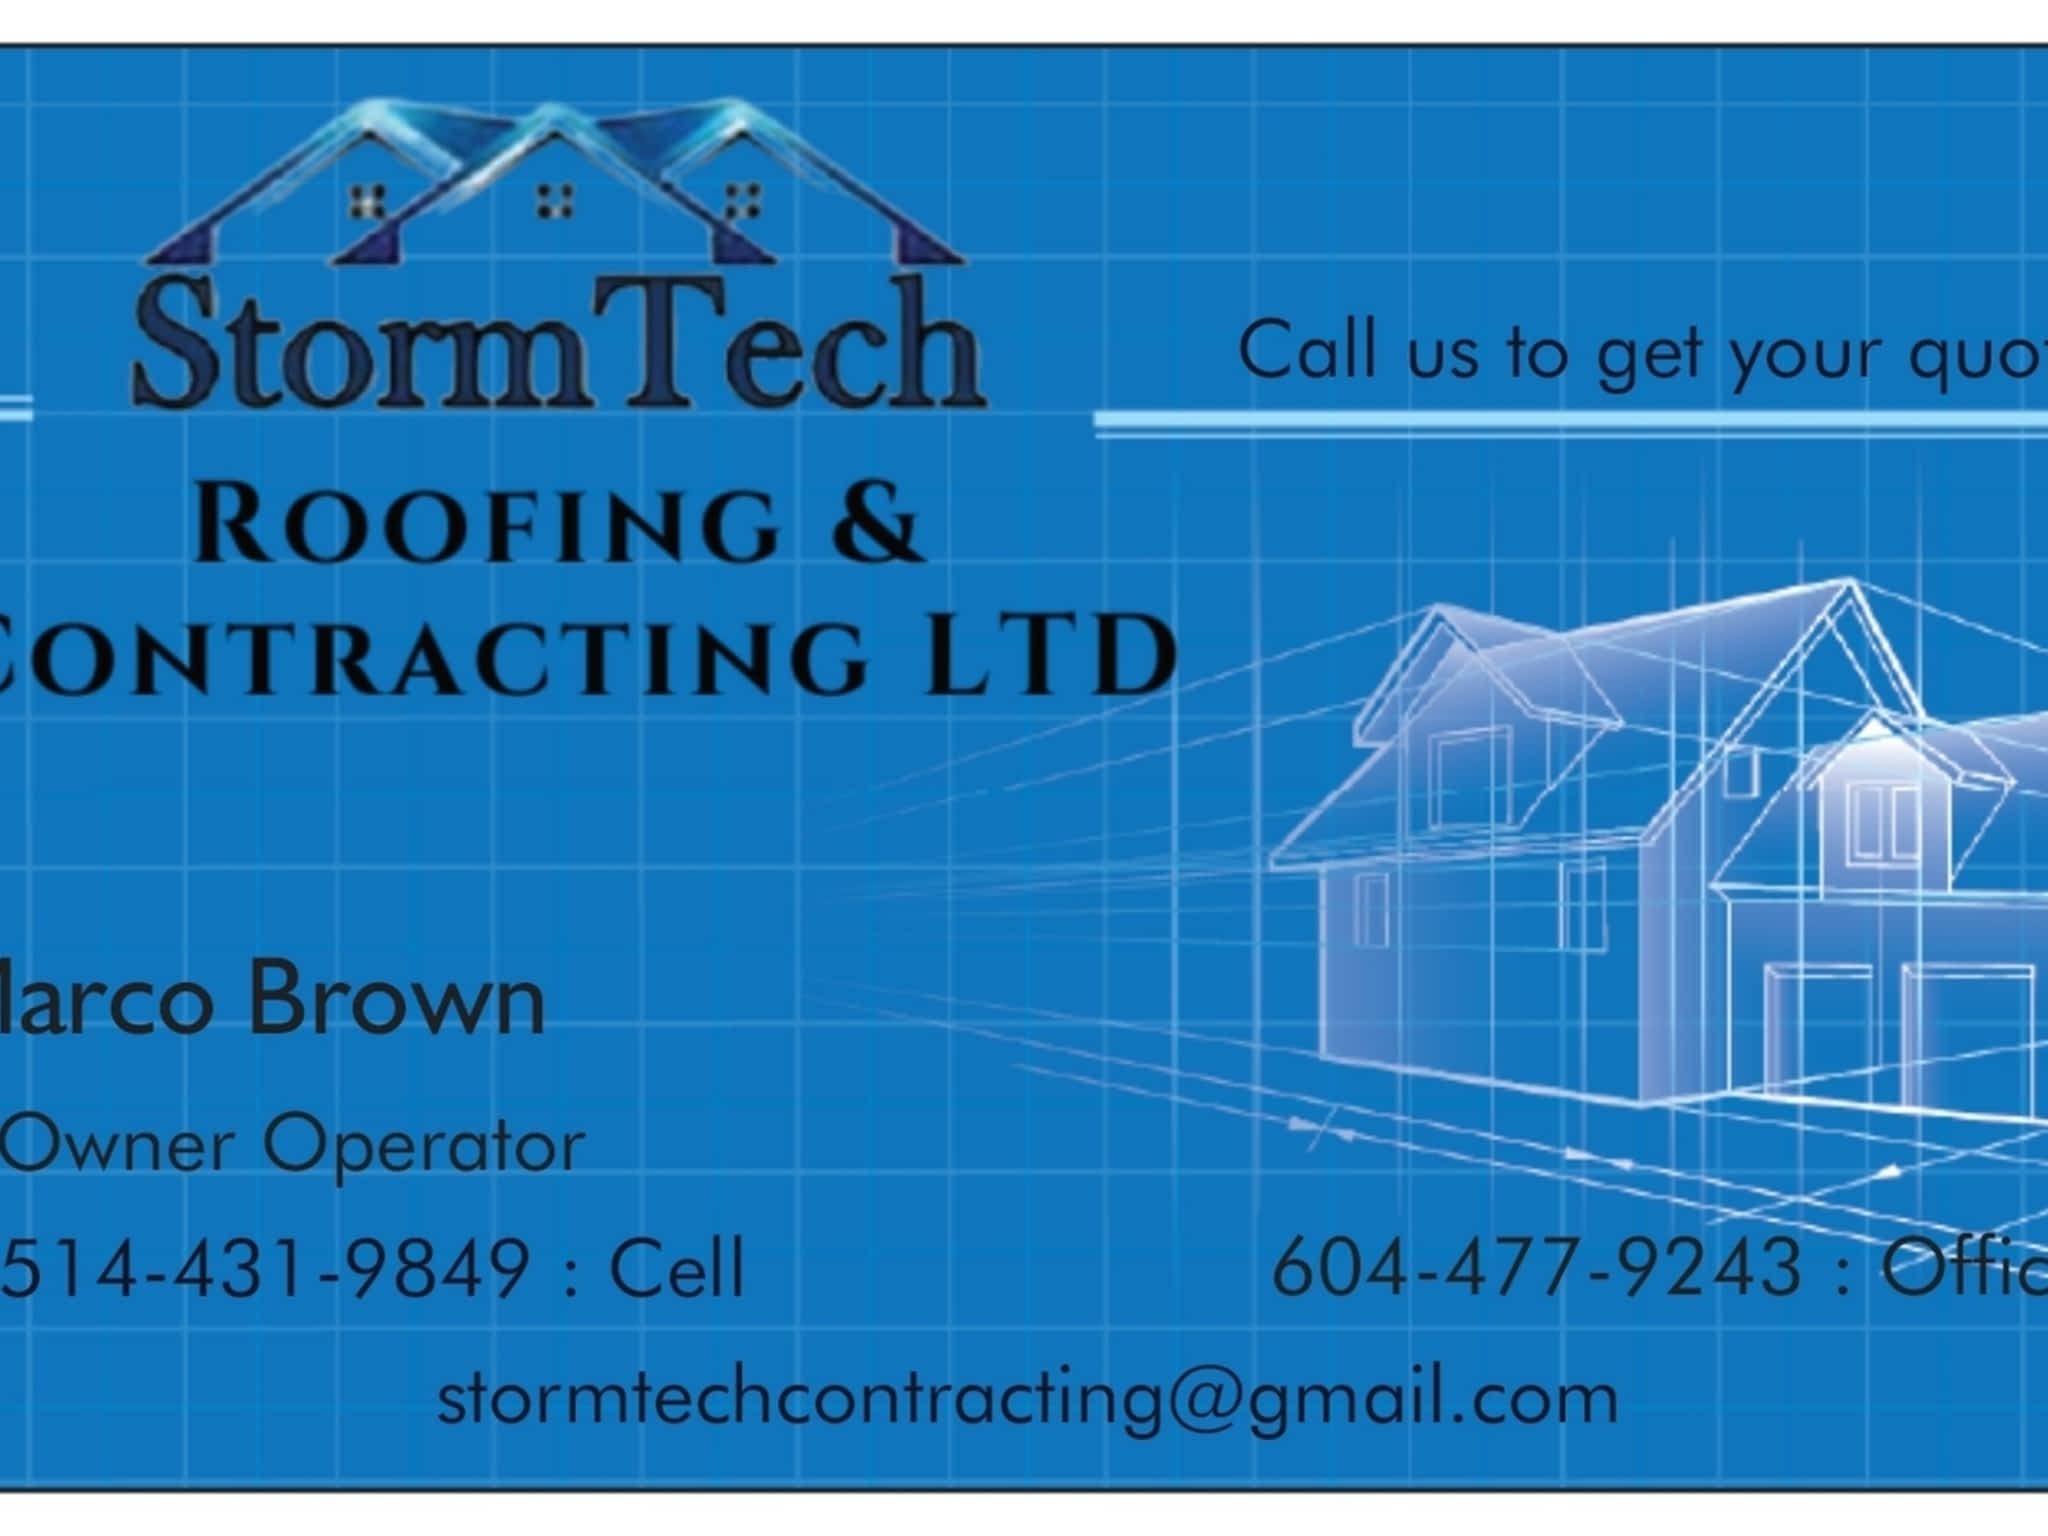 photo StormTech Roofing & Contracting Ltd